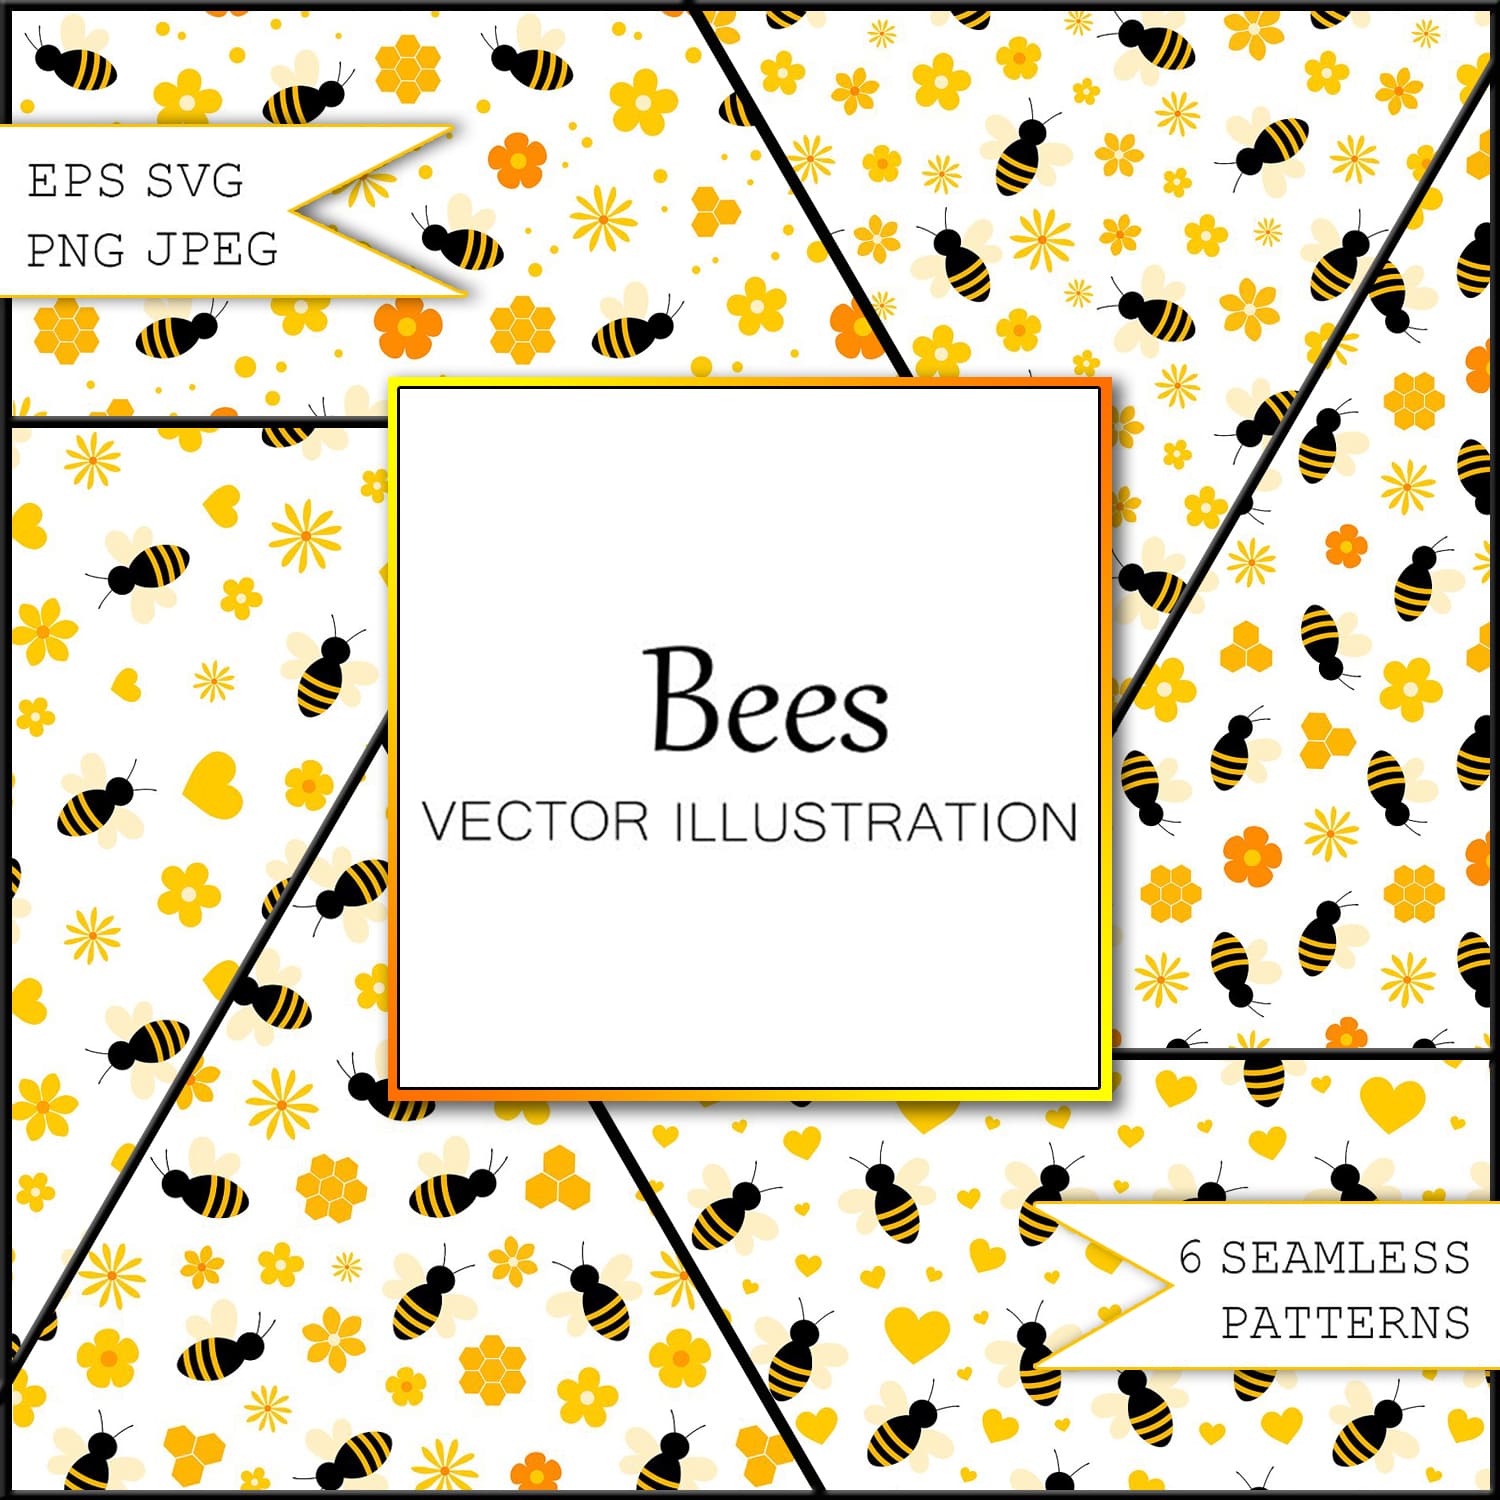 Bees pattern. Bees background.